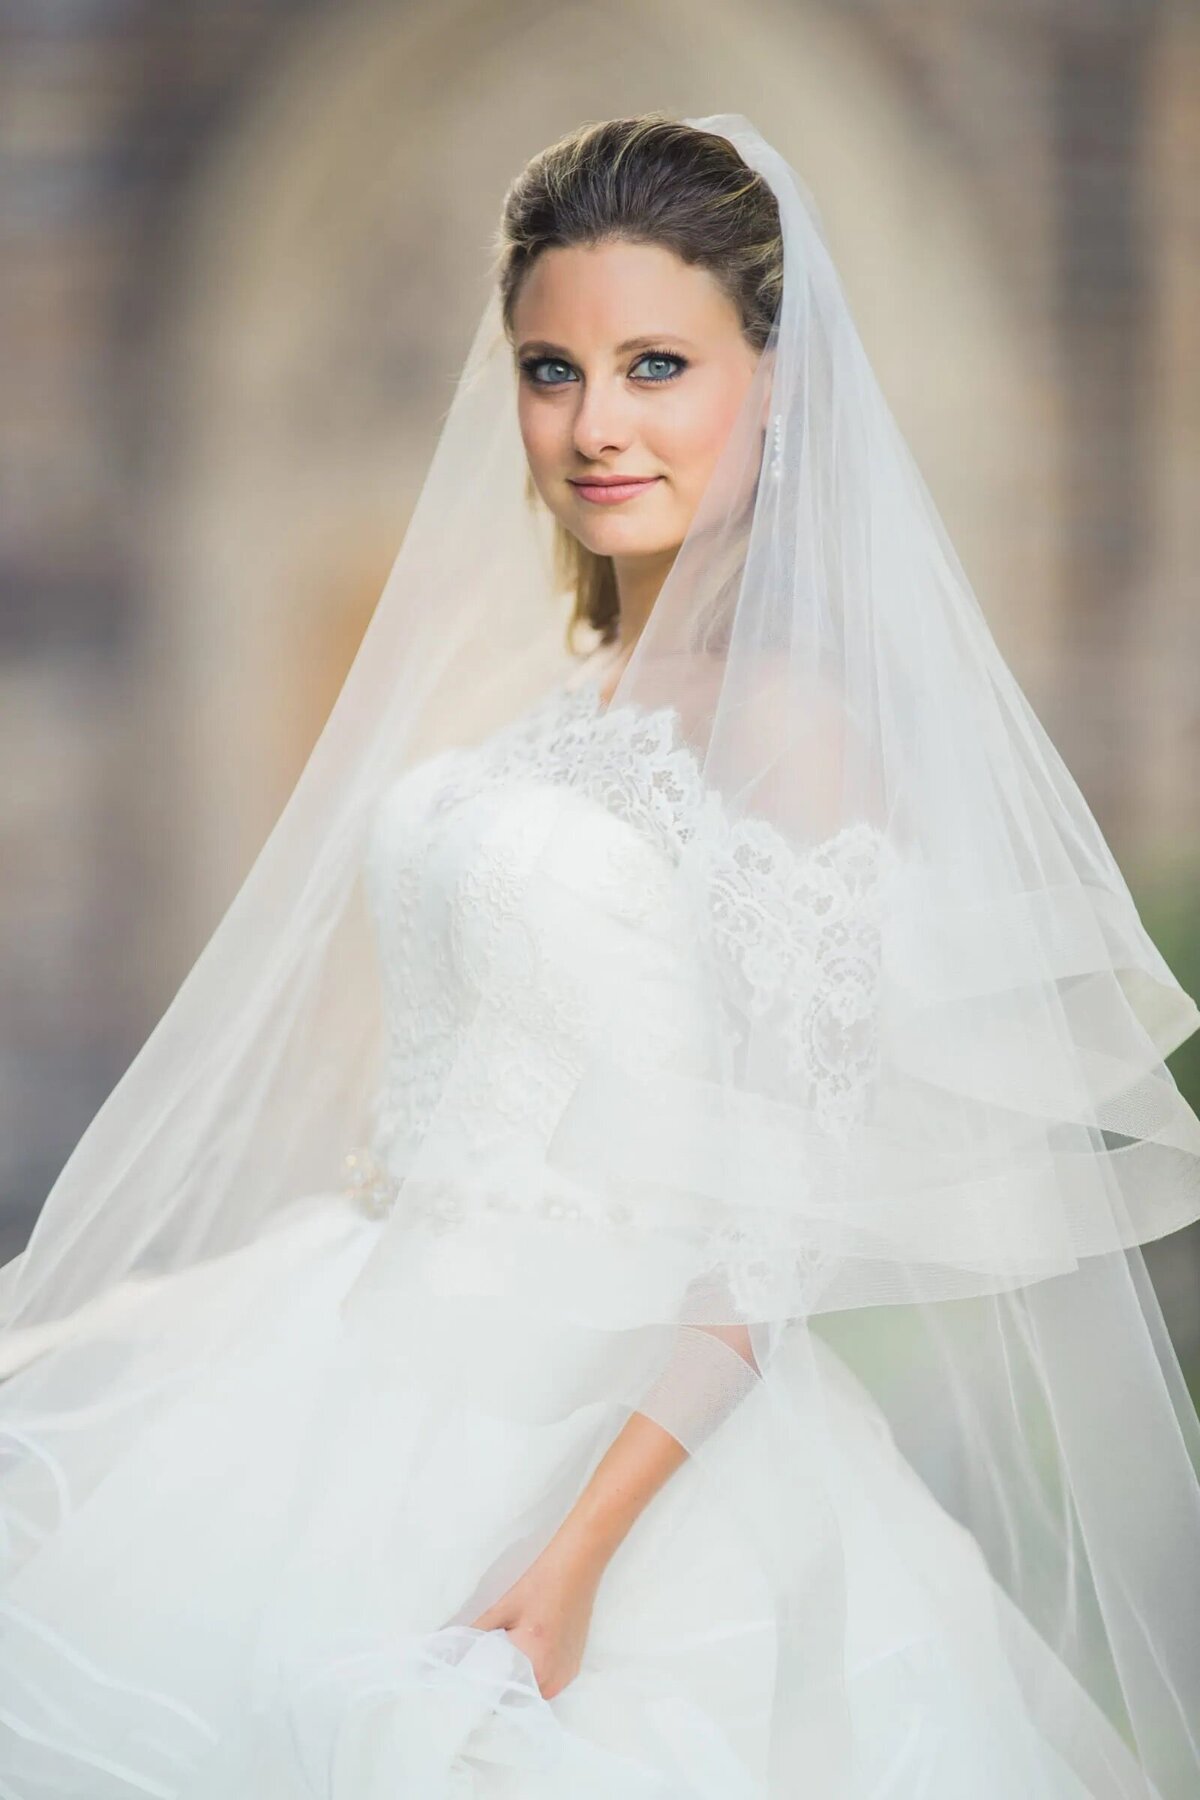 A bride smiling and holding the bottom of her wedding dress